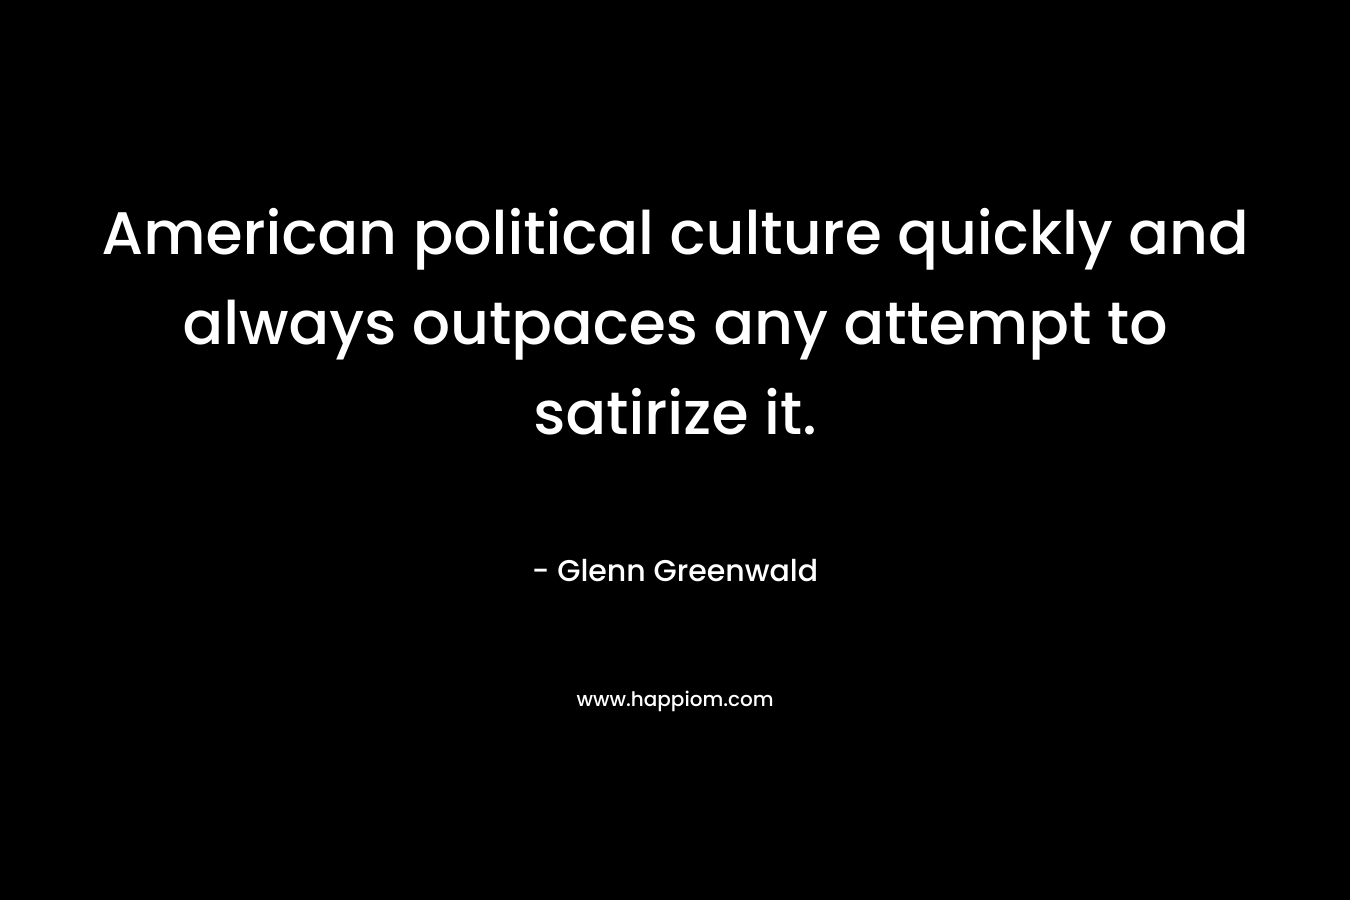 American political culture quickly and always outpaces any attempt to satirize it. – Glenn Greenwald